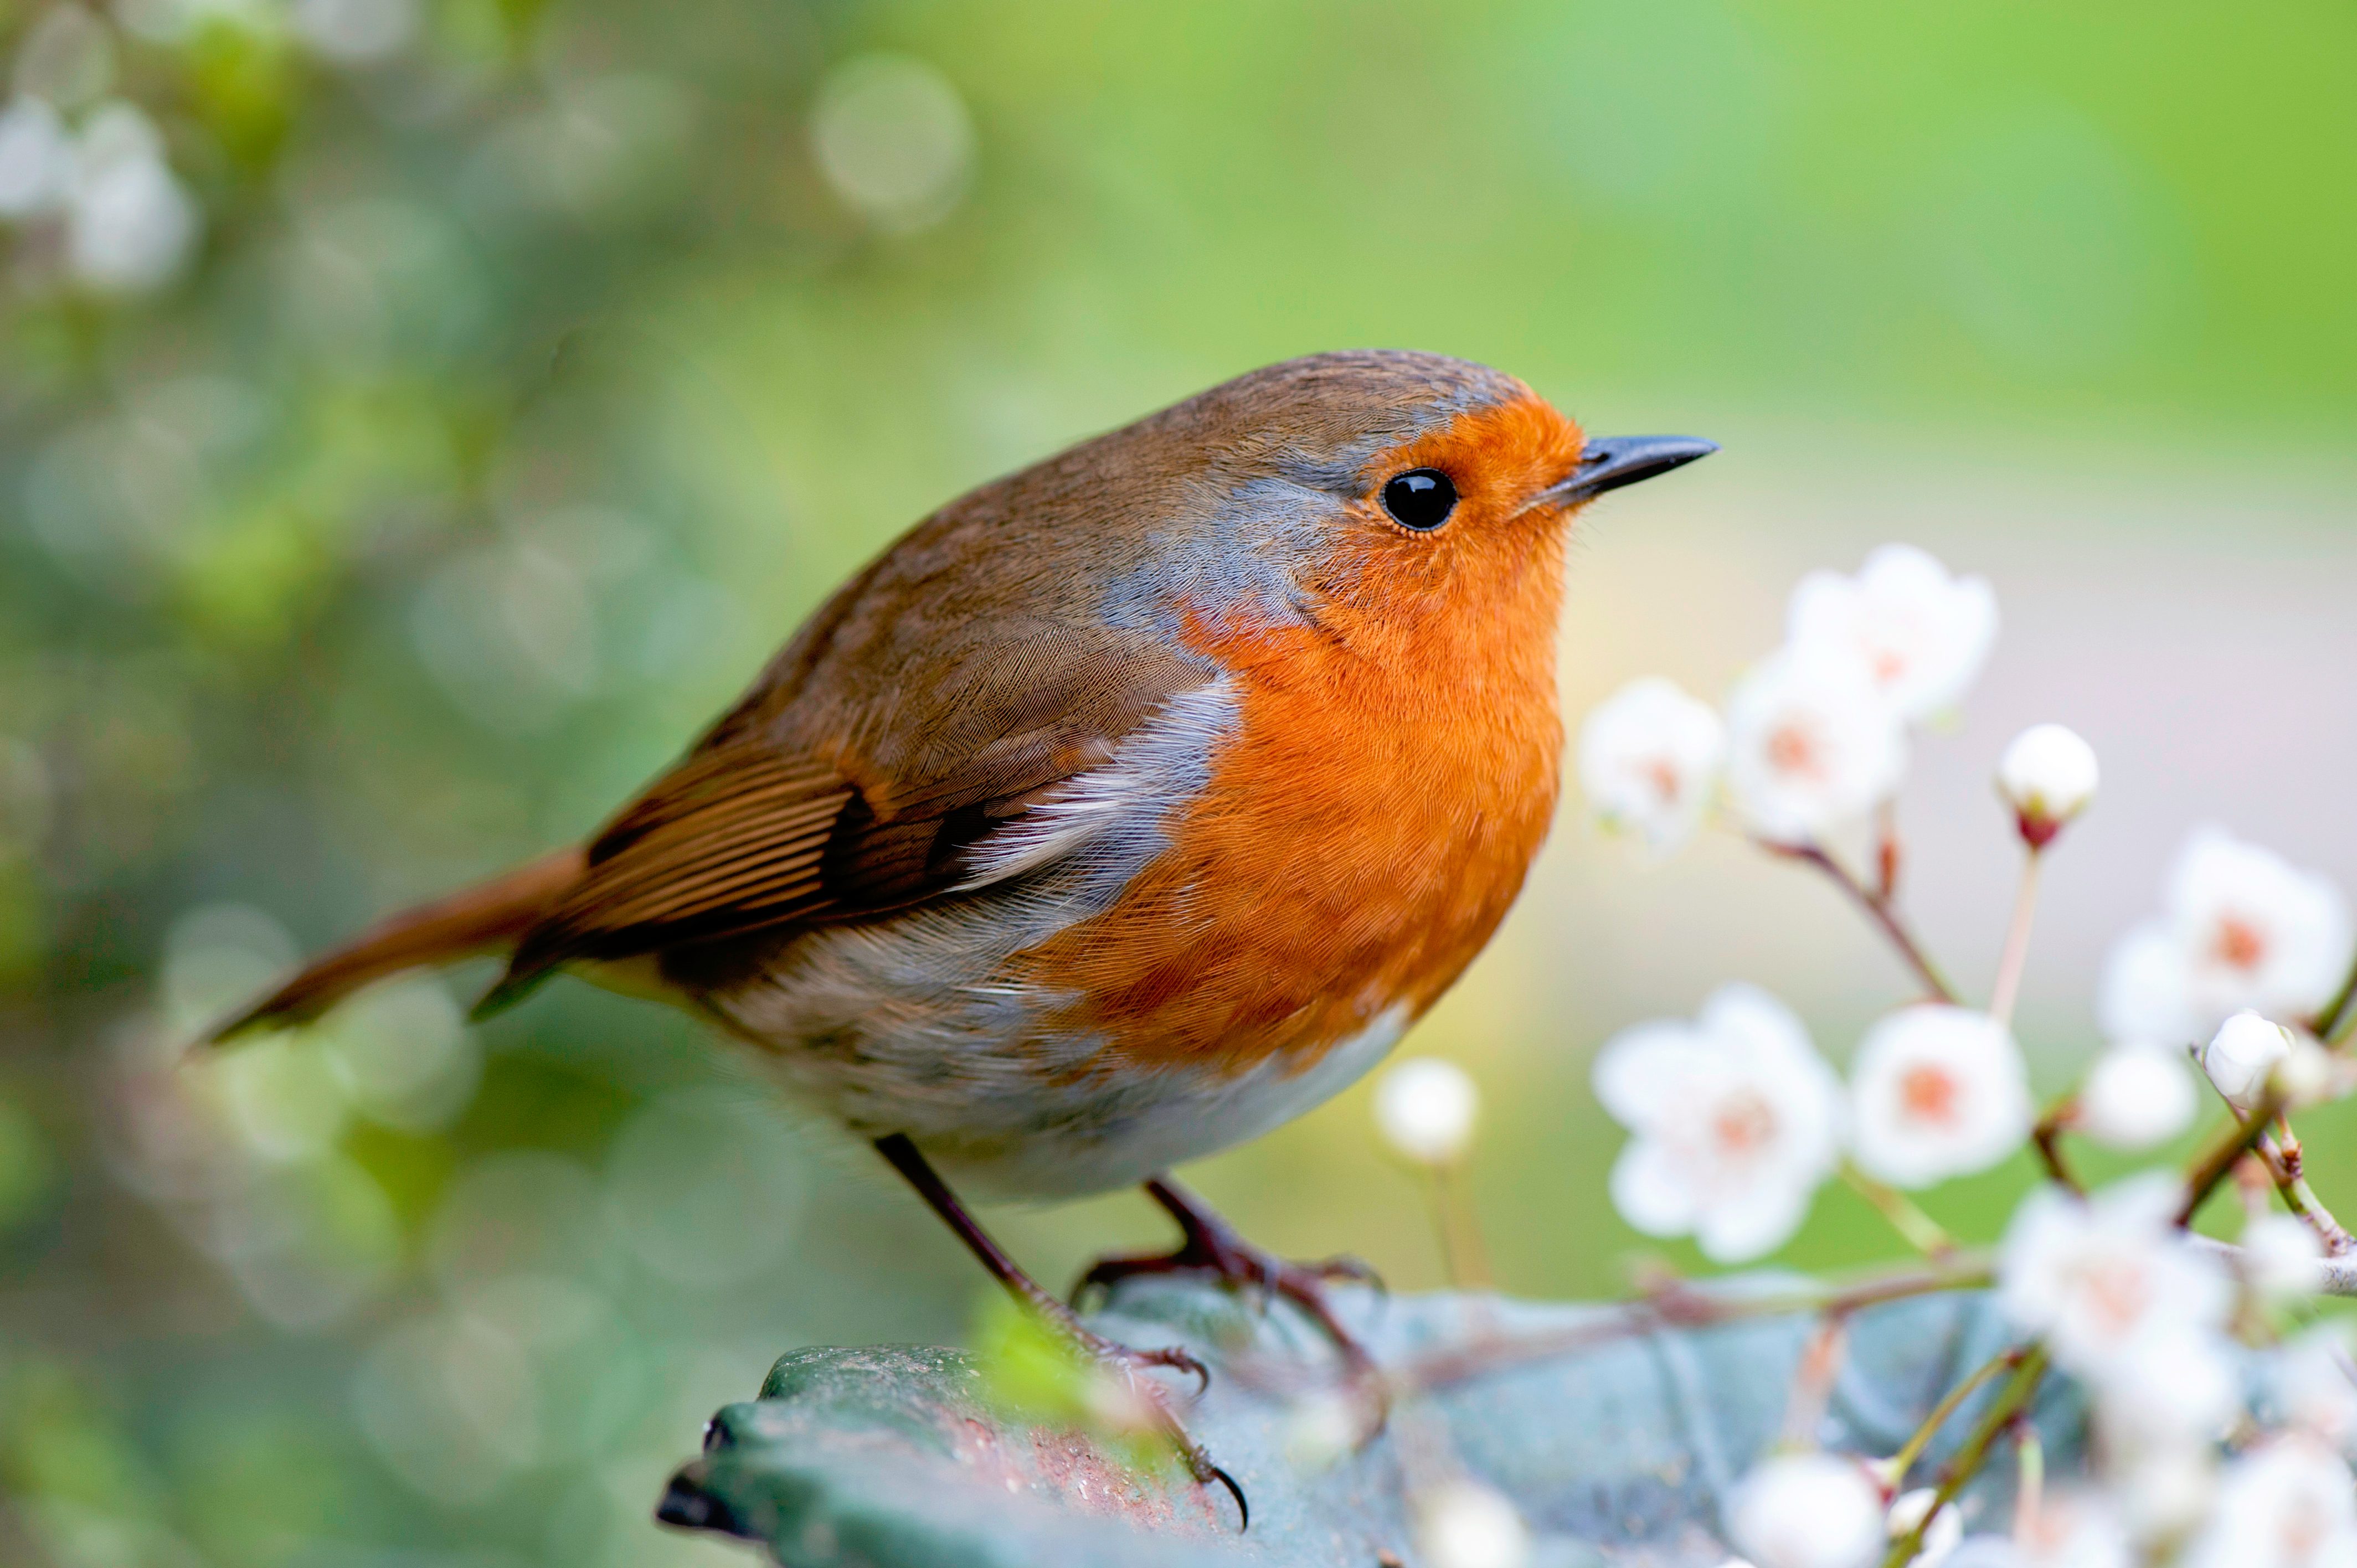 Close-up image of a European robin, known simply as the robin or robin redbreast in the British Isles